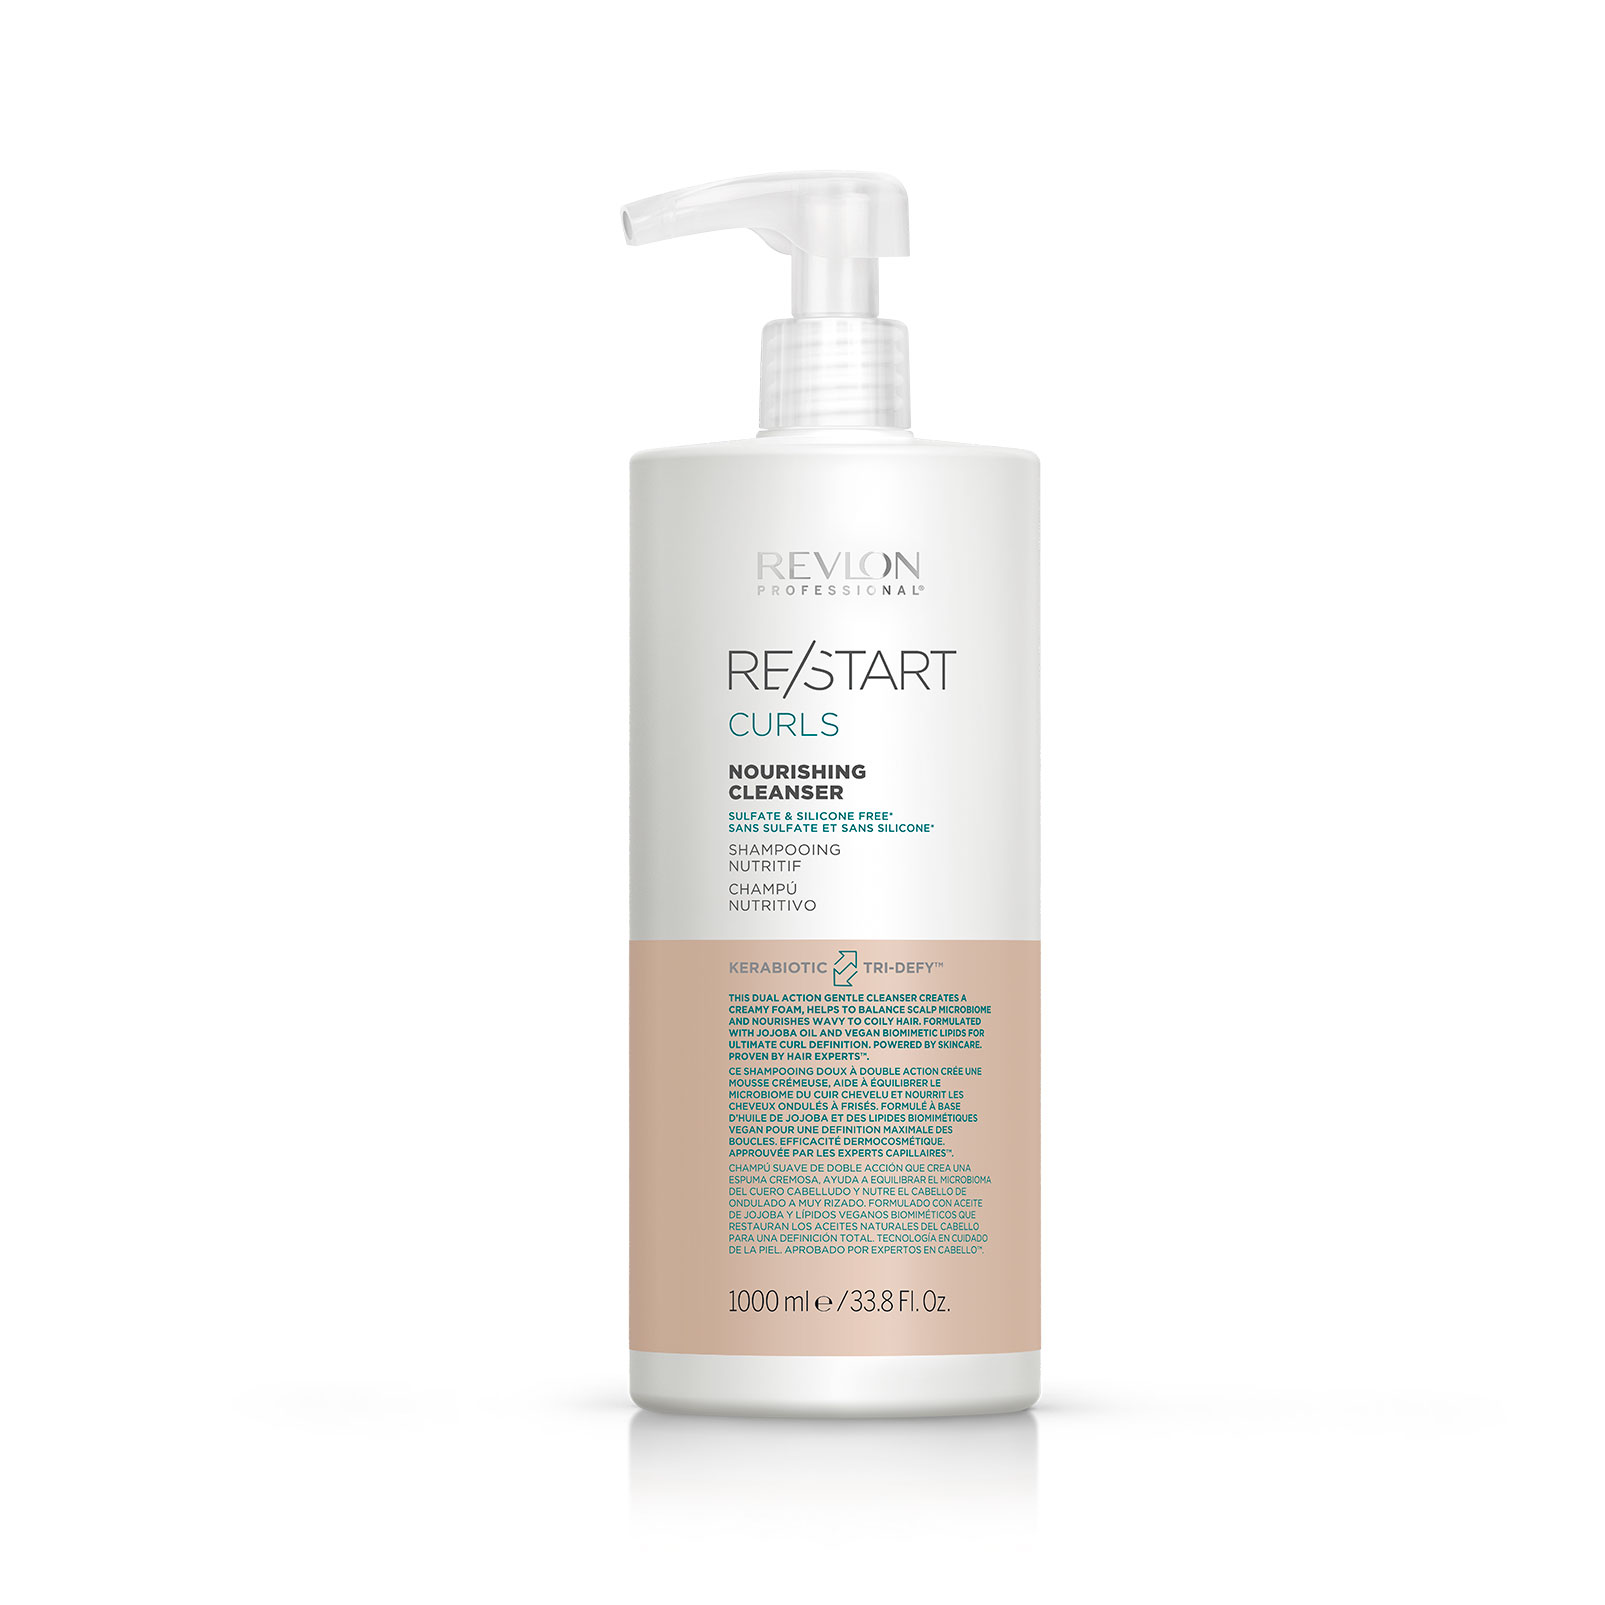 RE/START™ cleanser for curly and hair Professional coily - Revlon